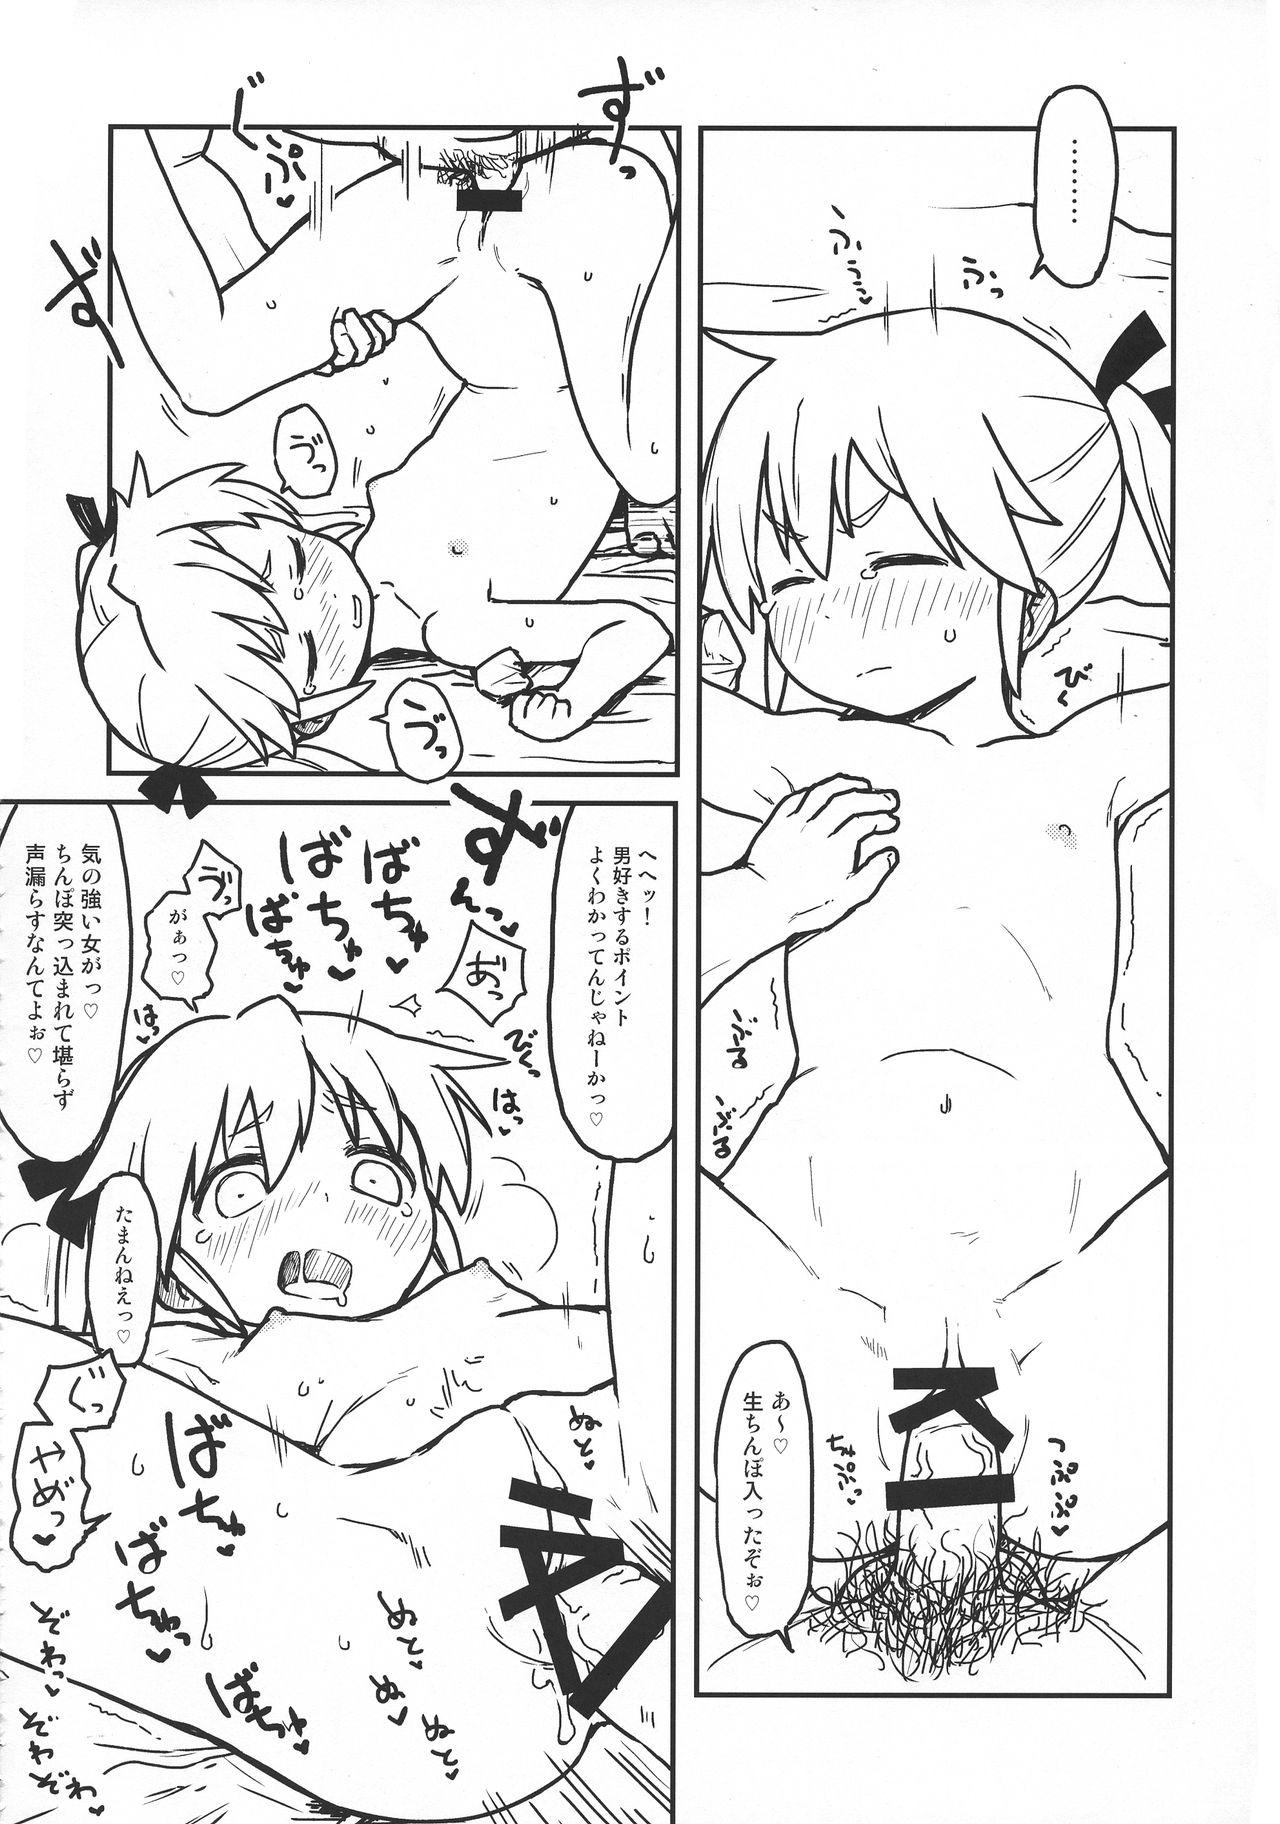 Massages Kill Me DoSuke-Baby - Kill me baby Stretching - Page 12